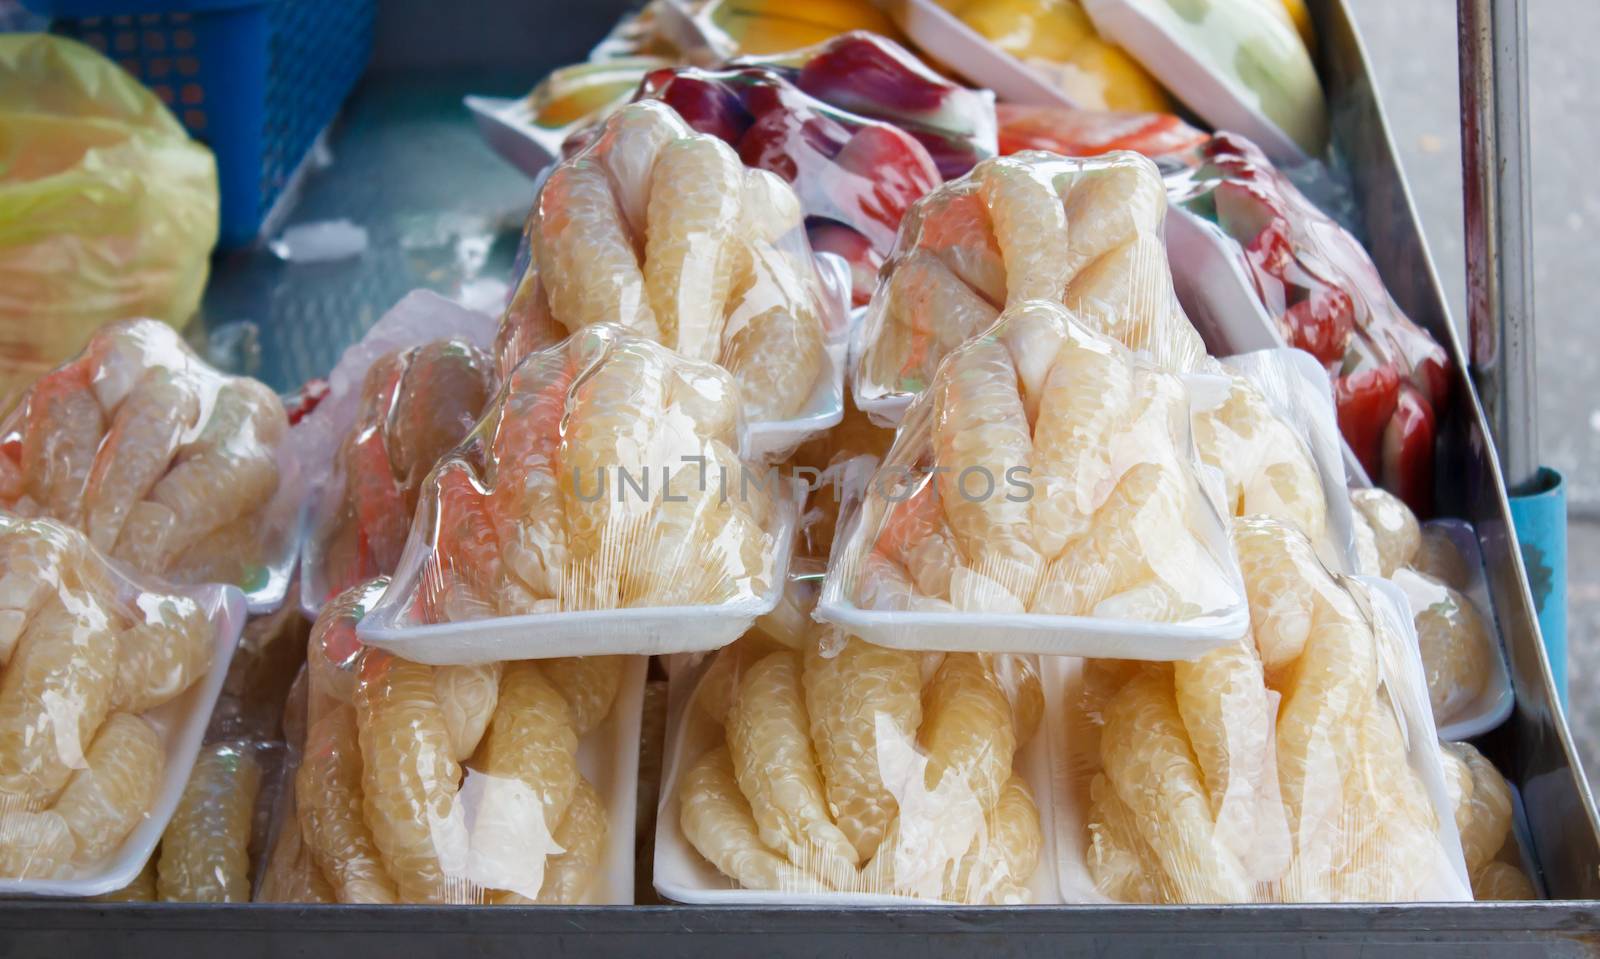 pomelo pieces in plastic wrap at market. Thailand